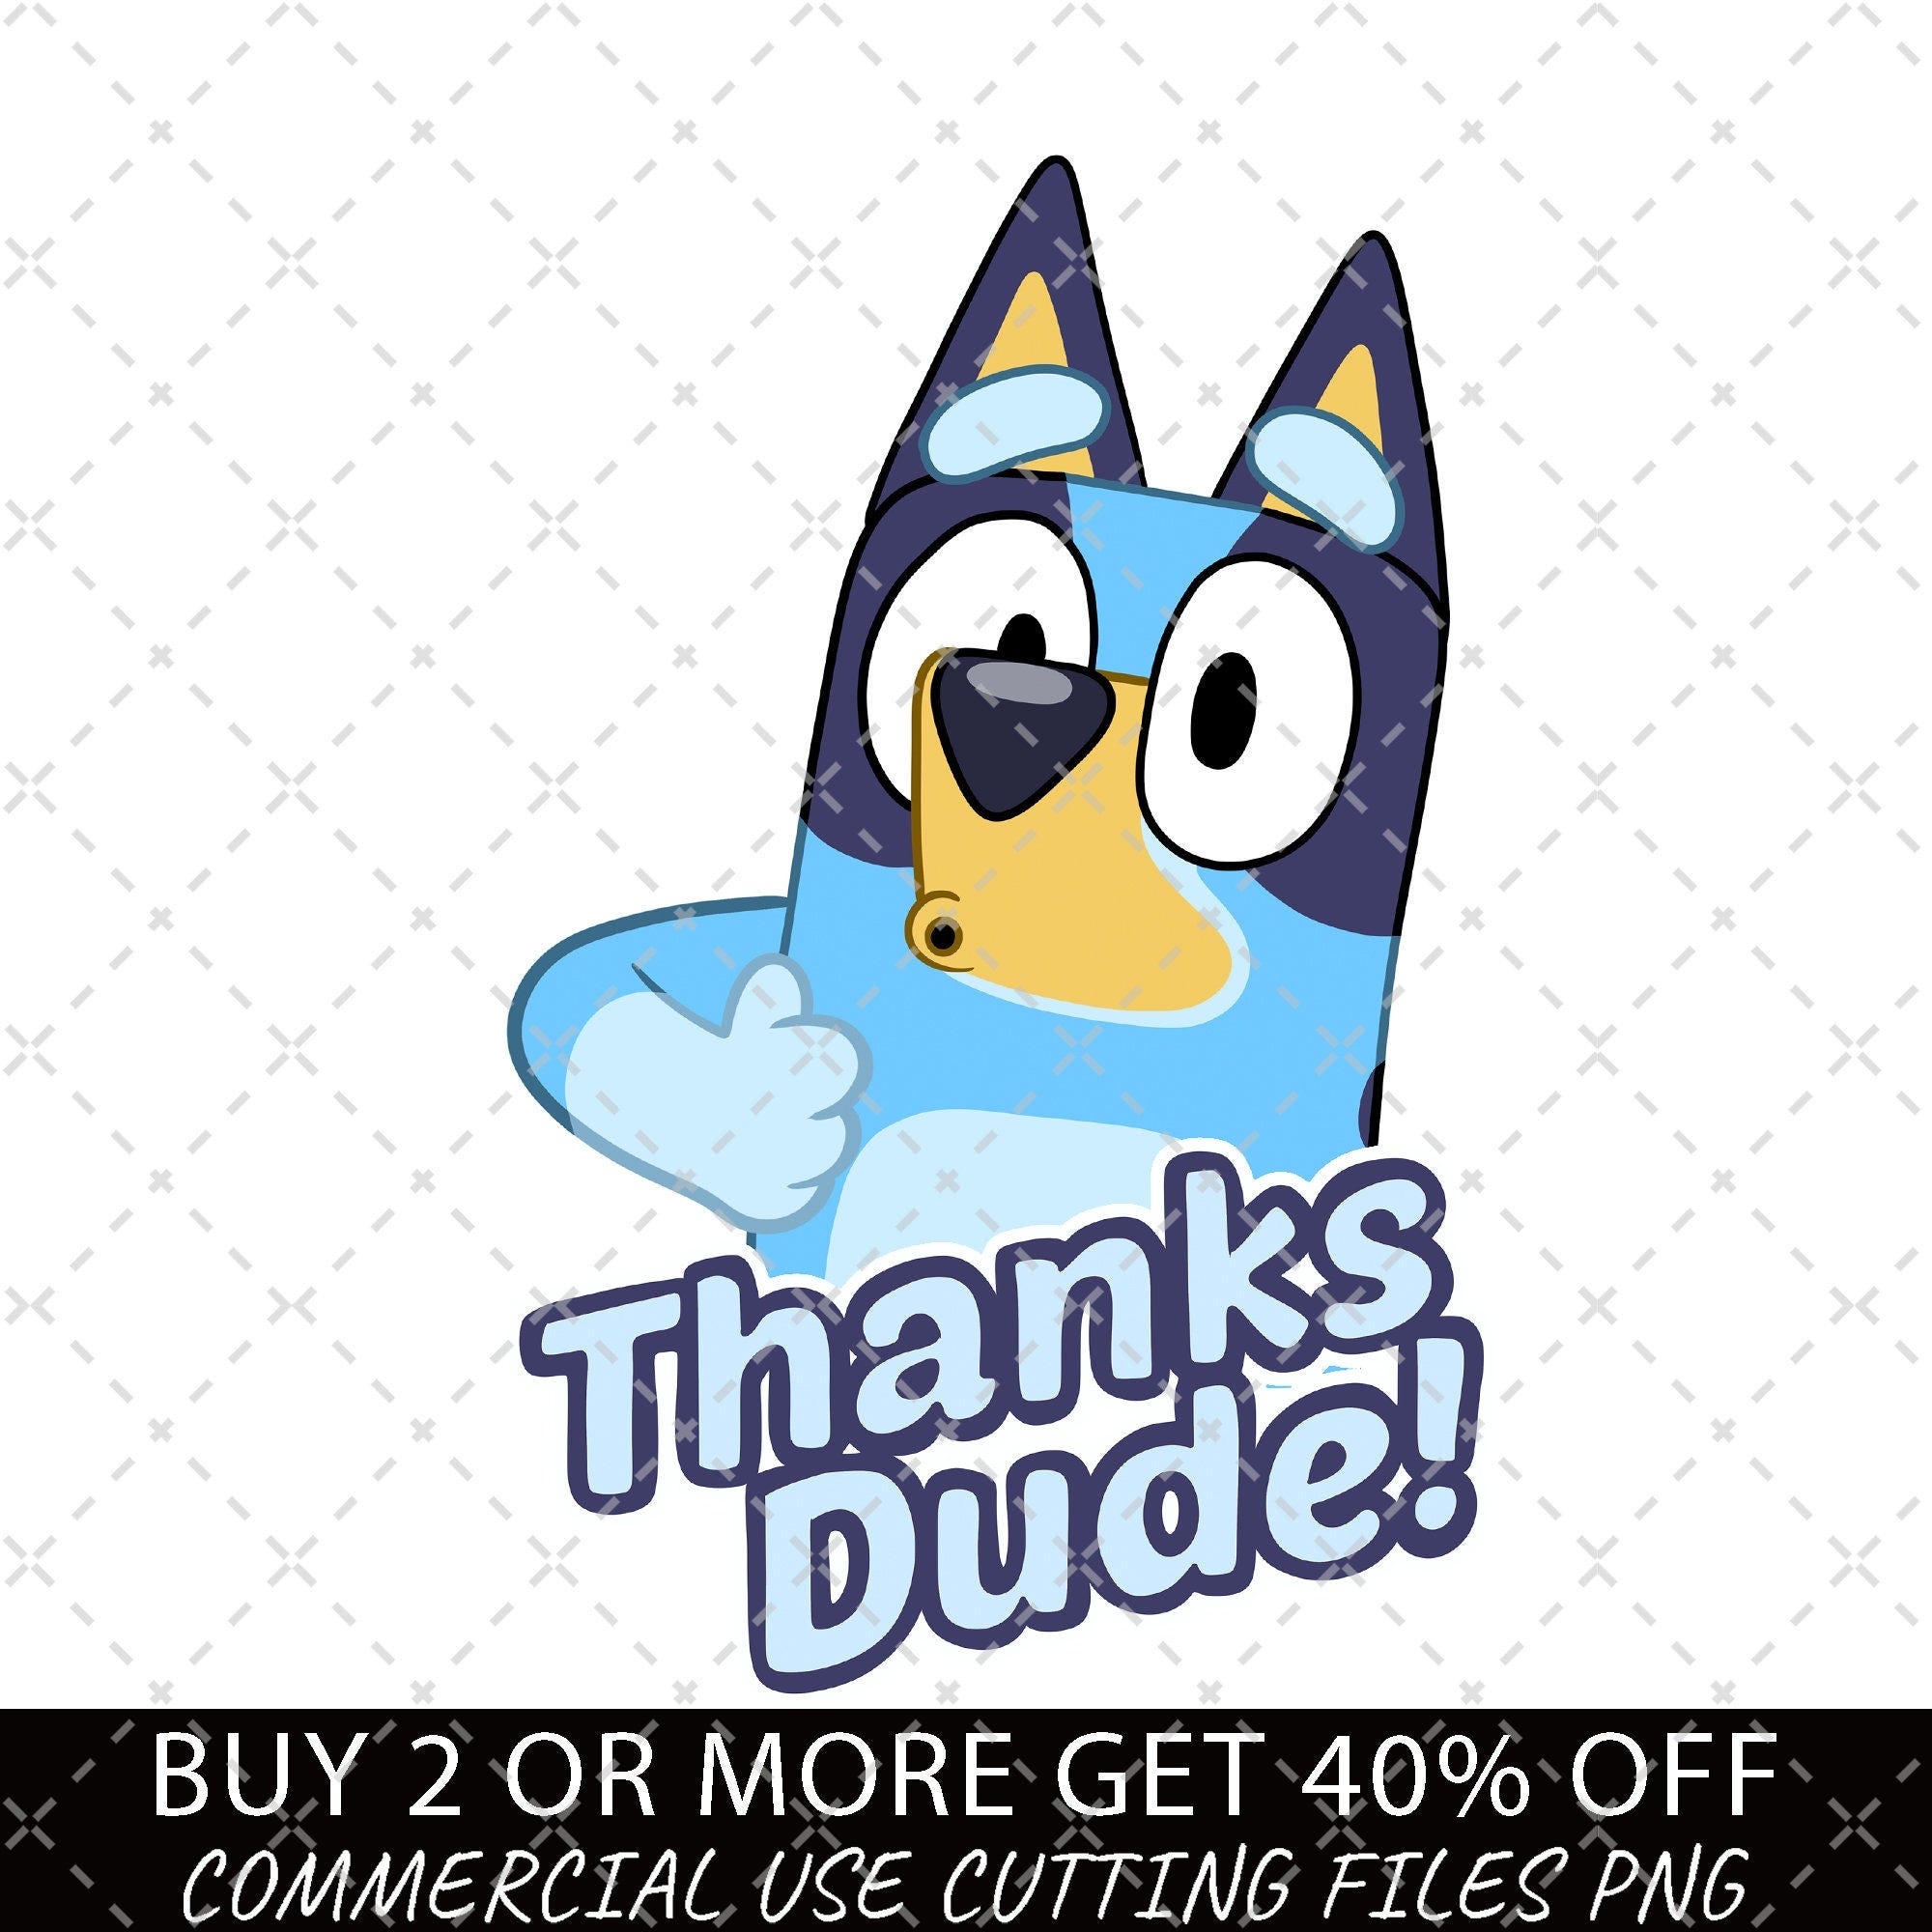 Bluey Thanks Dude! Png, Bluey Friends Instant Download Png, Ready to Print Bluey Png File, Bluey And Friends Digital Png